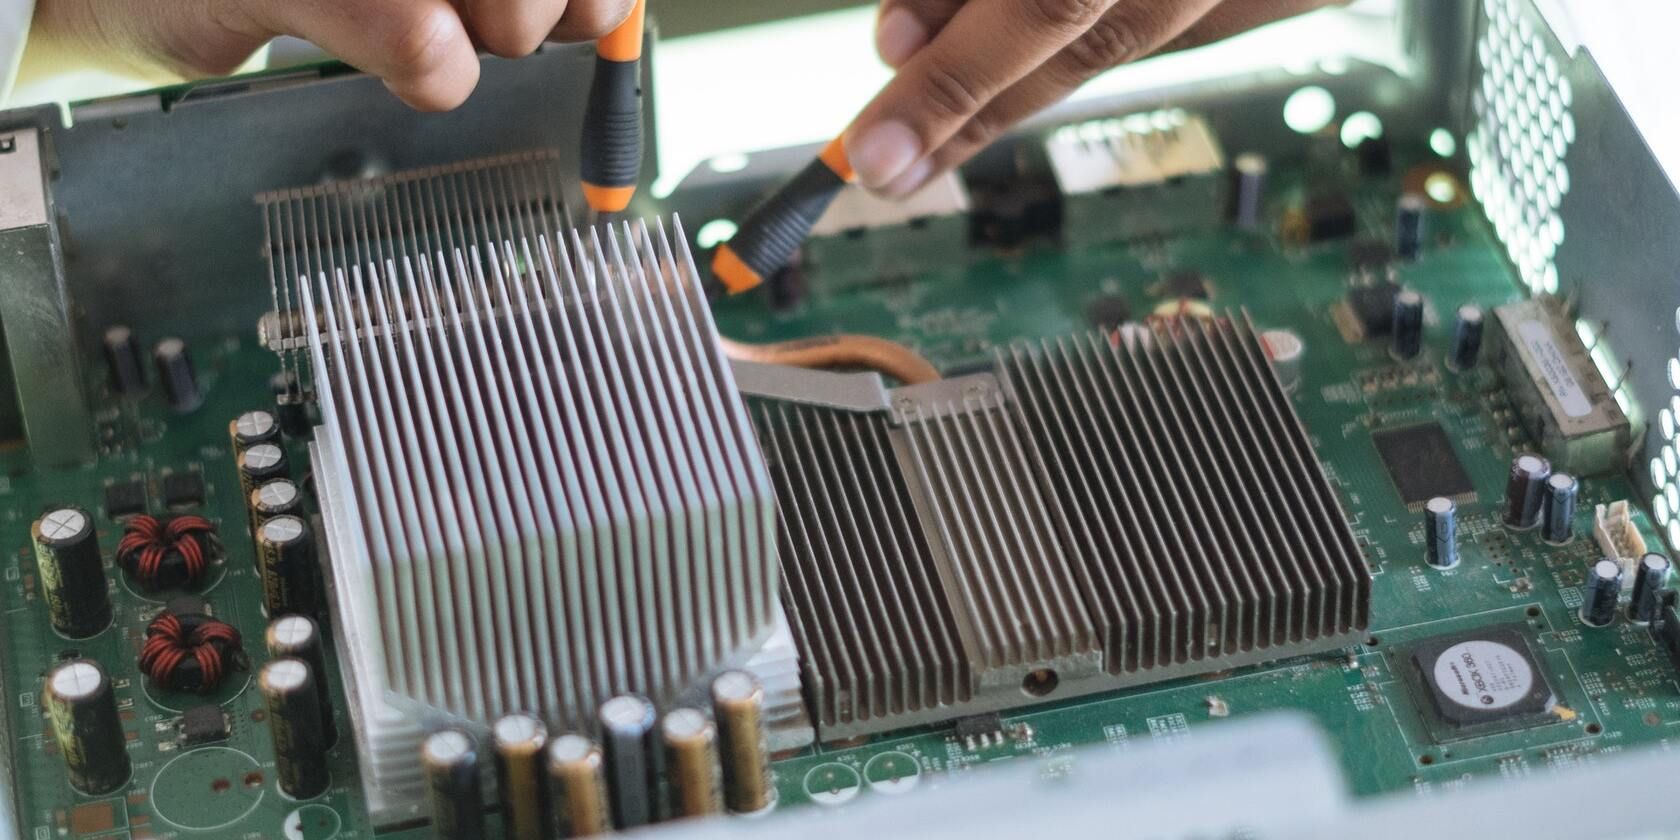 Person tampering with a motherboard.